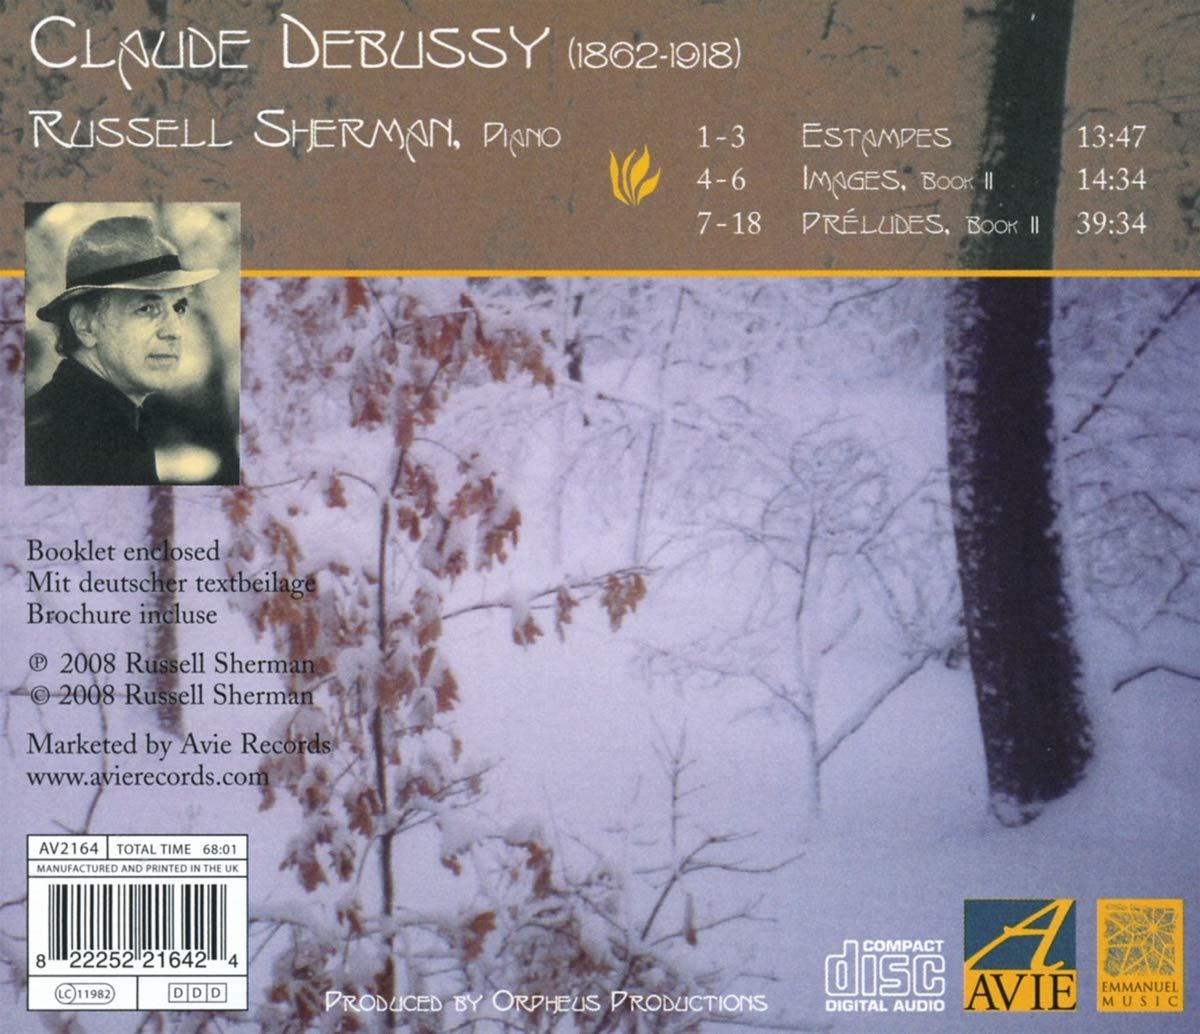 DEBUSSY: Piano Music - Russell Sherman